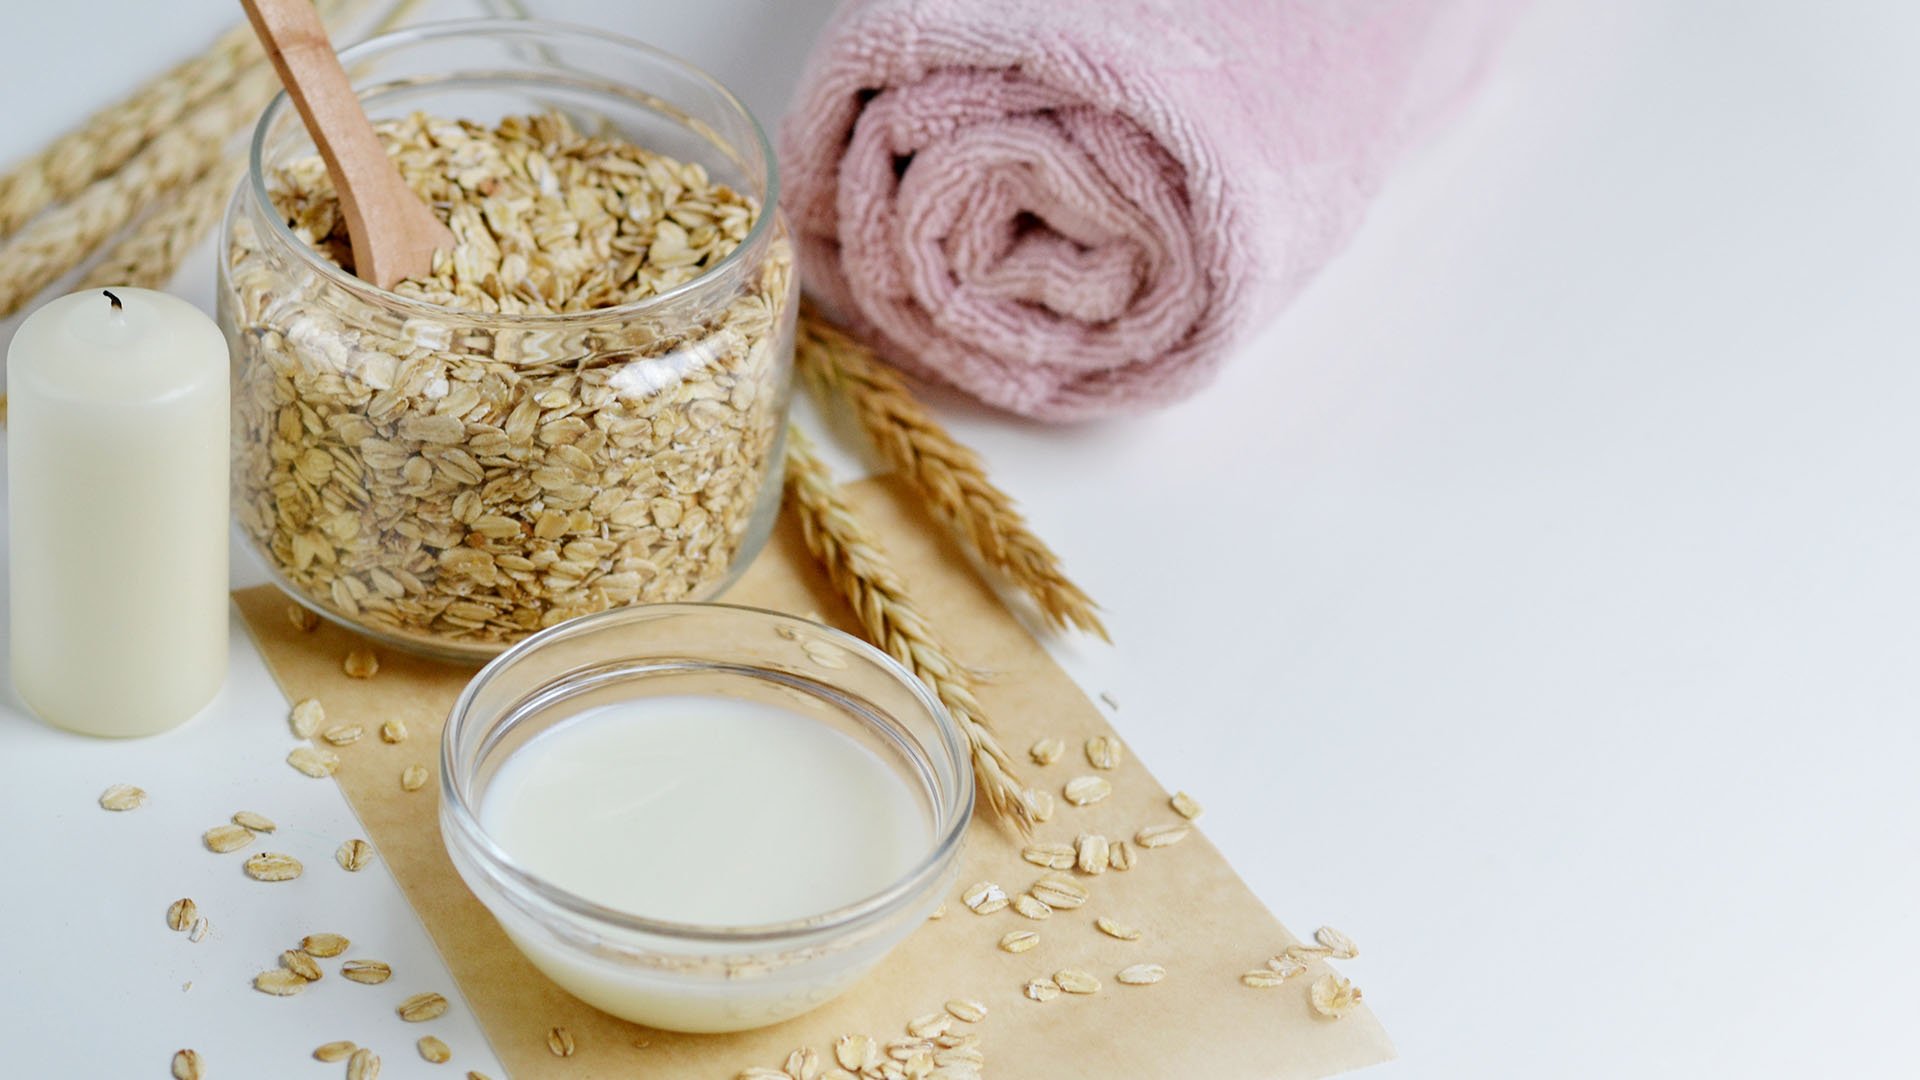 Loreal Paris Article Oatmeal Bath Benefits For Your Skin D